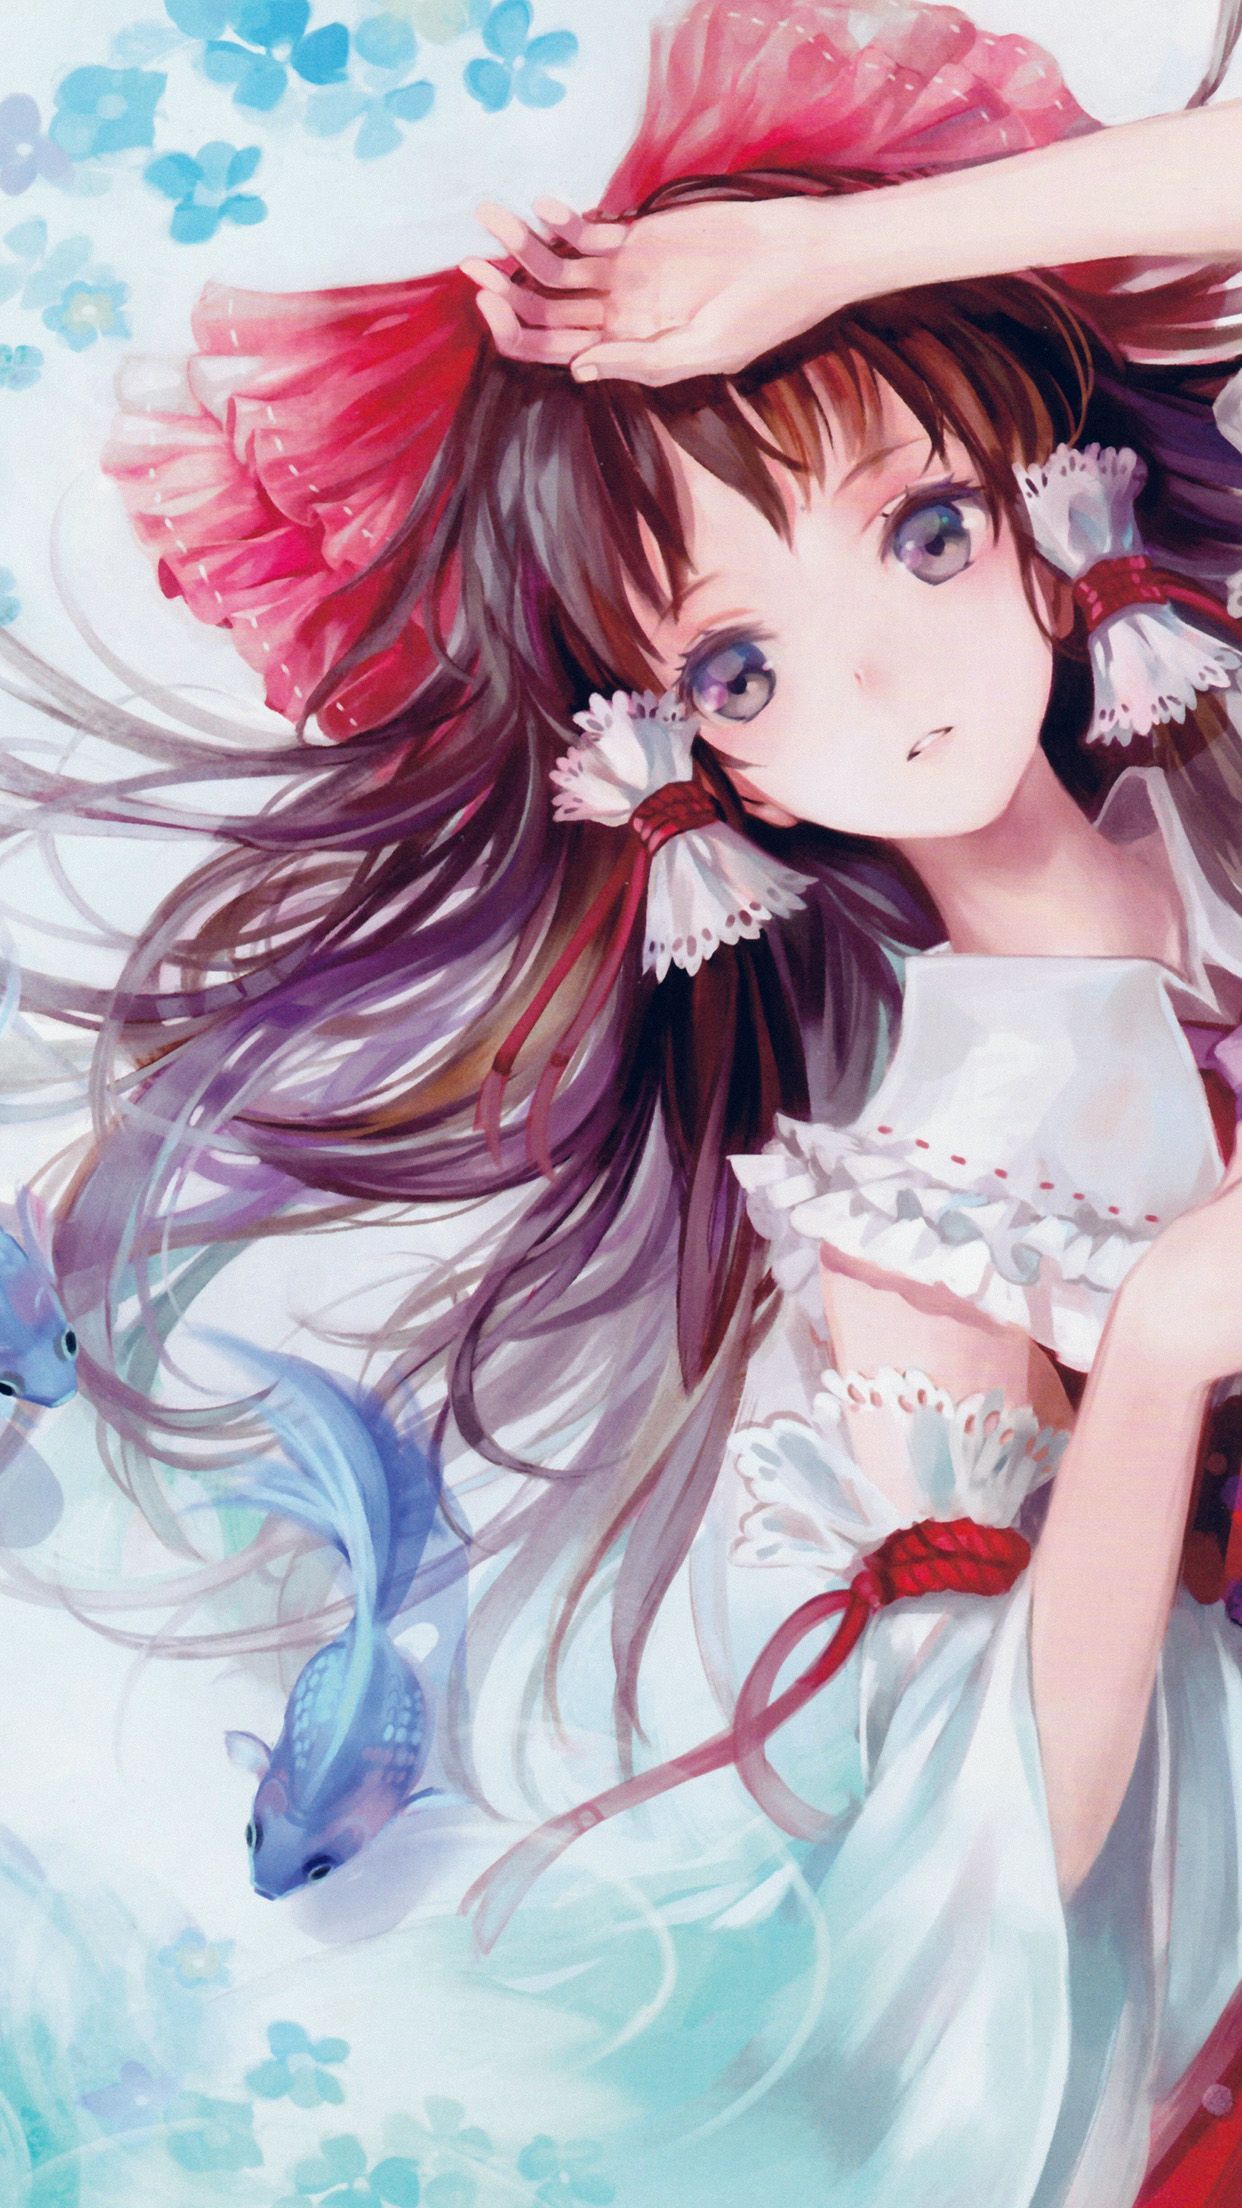 Anime Iphone 5 Wallpapers